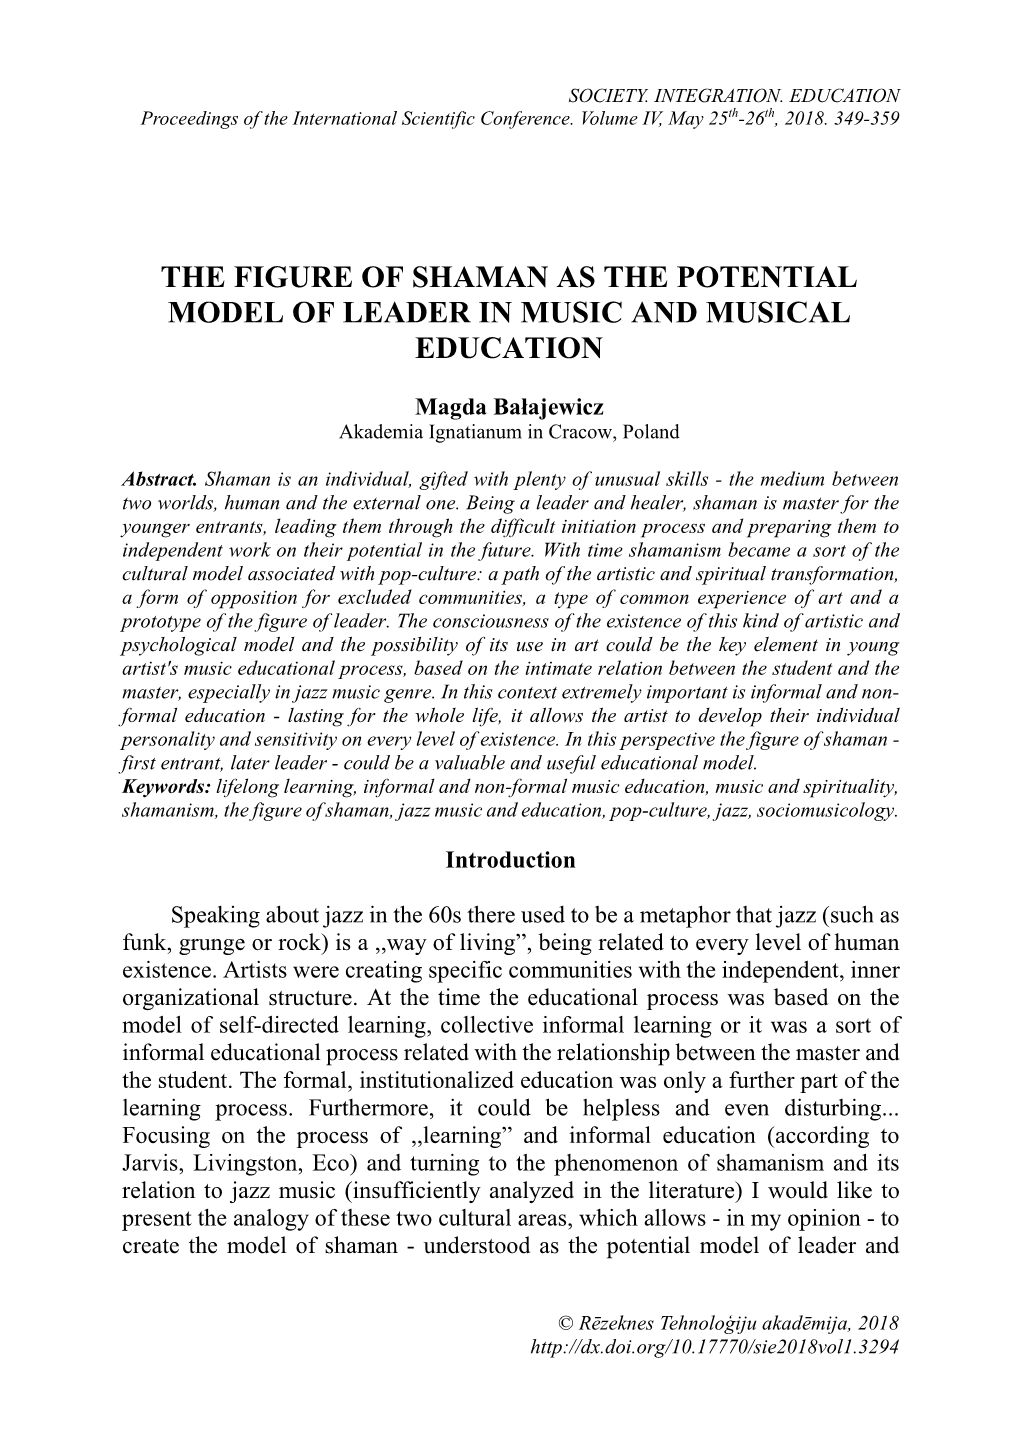 The Figure of Shaman As the Potential Model of Leader in Music and Musical Education